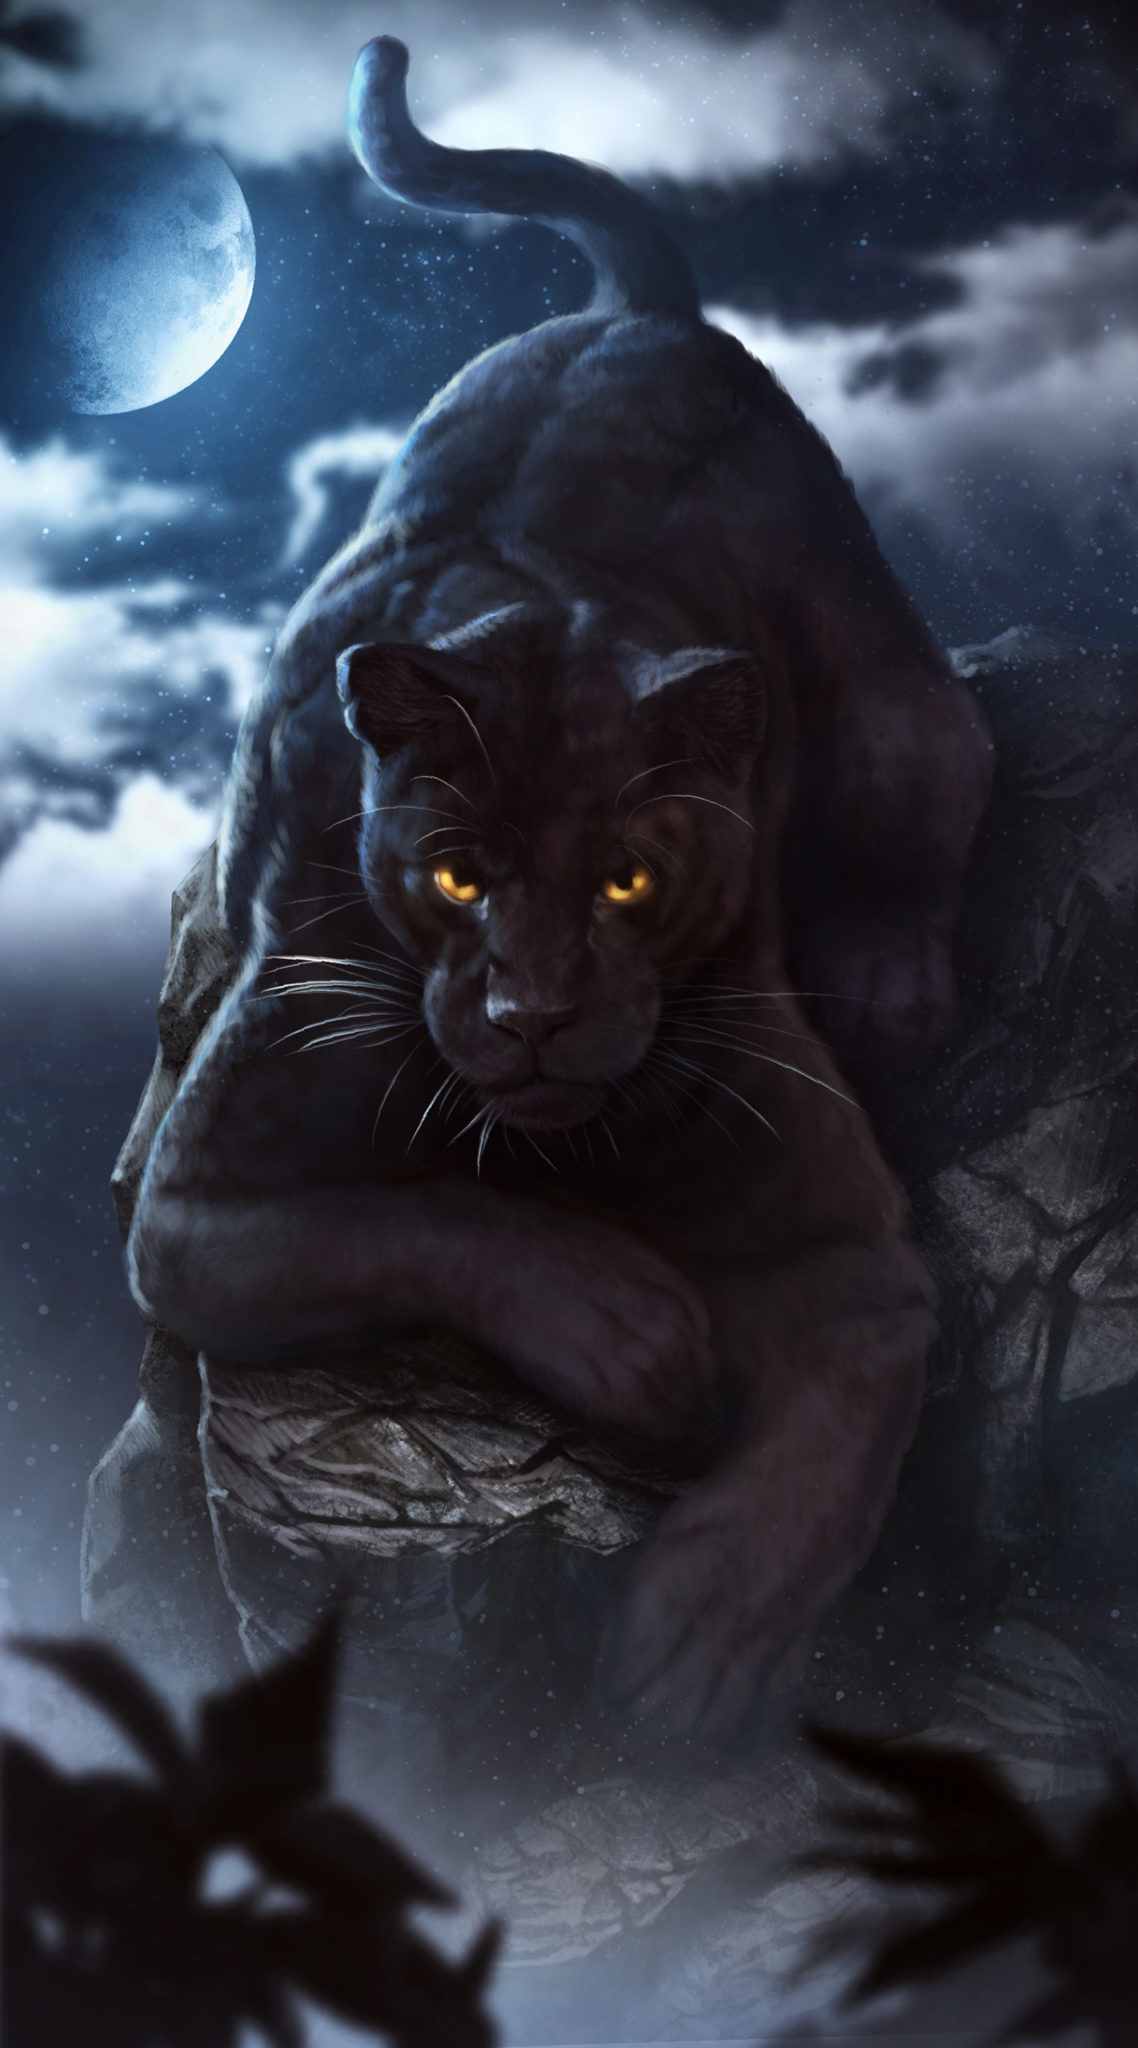 Moon Panther